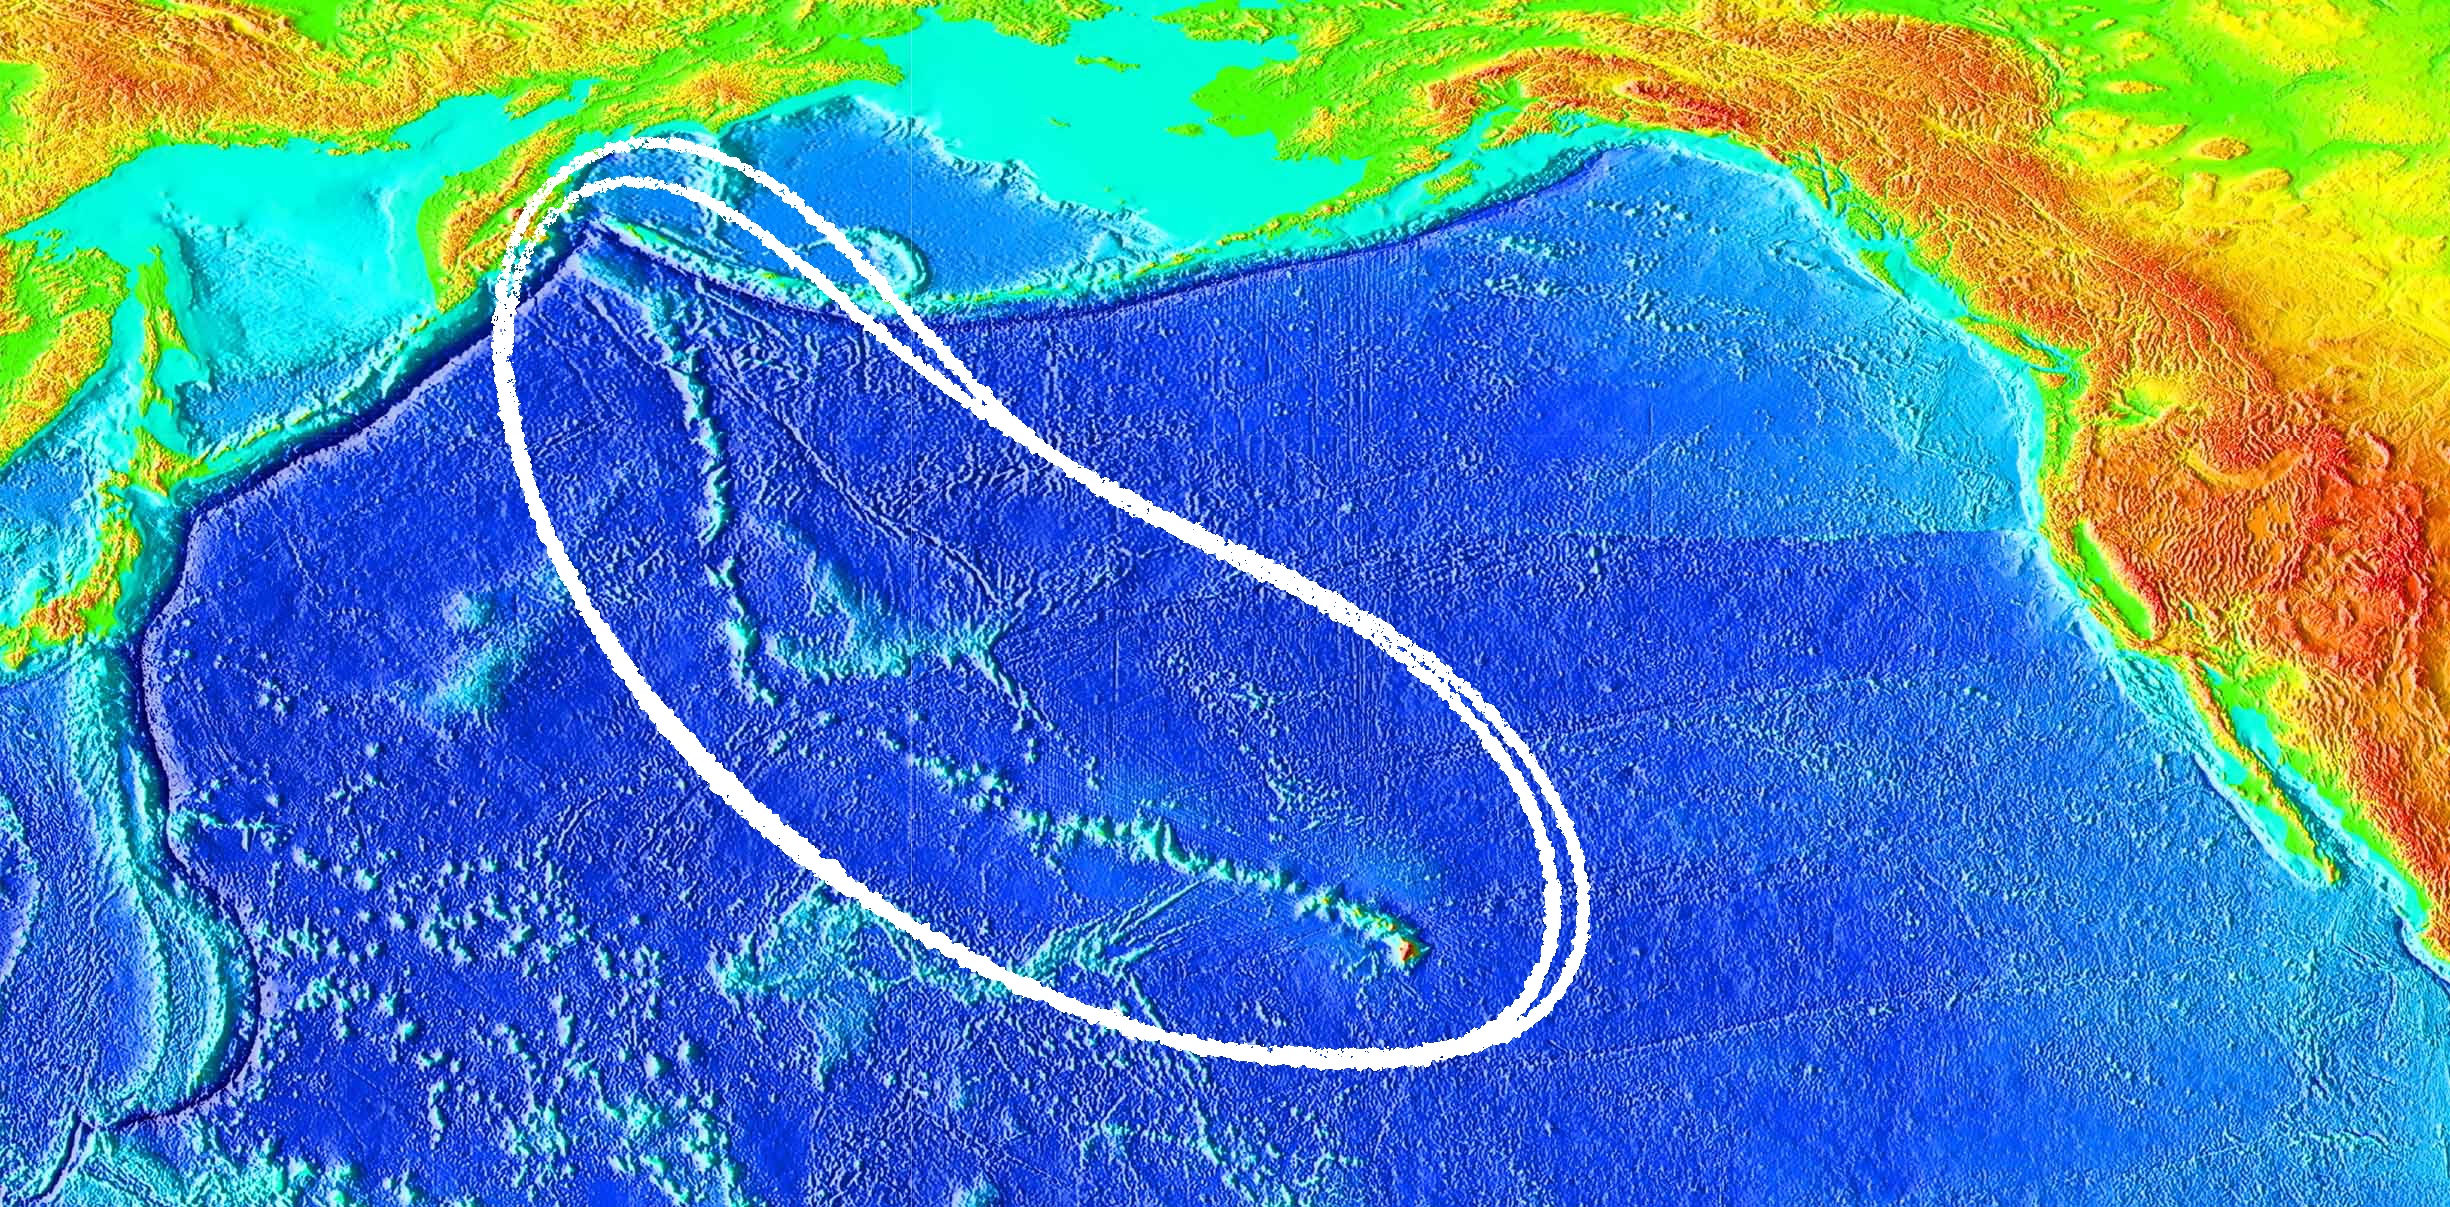 Raised-relief map of the Pacific basin, showing seamounts and islands trailing the Hawai’i hotspot in a long line terminating near the Kamchatka Peninsula in Russia.